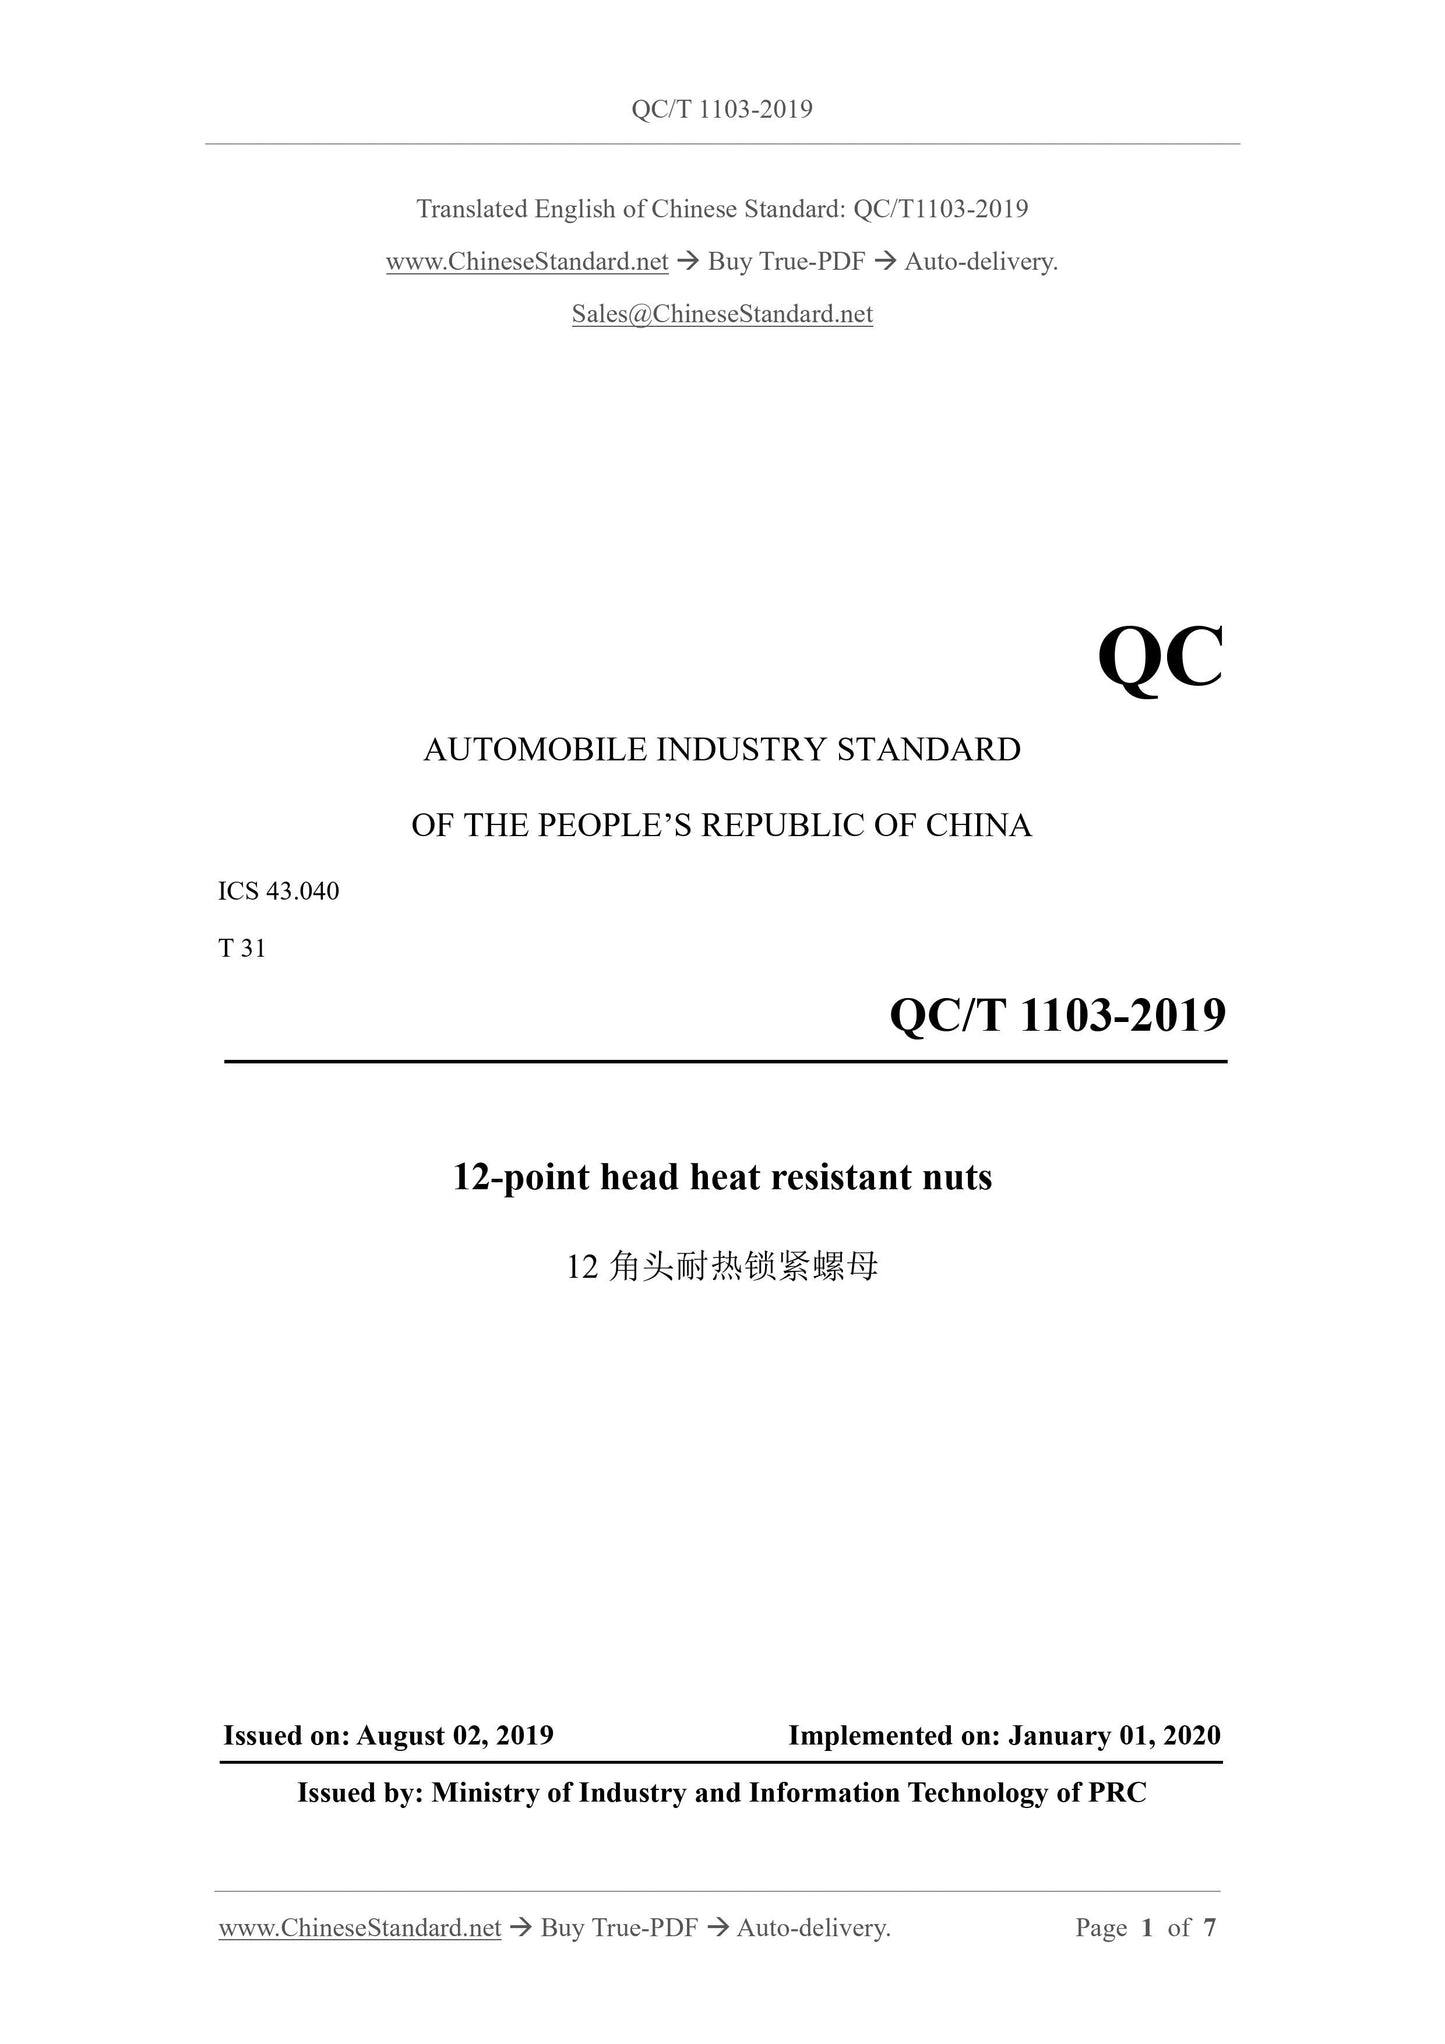 QC/T 1103-2019 Page 1